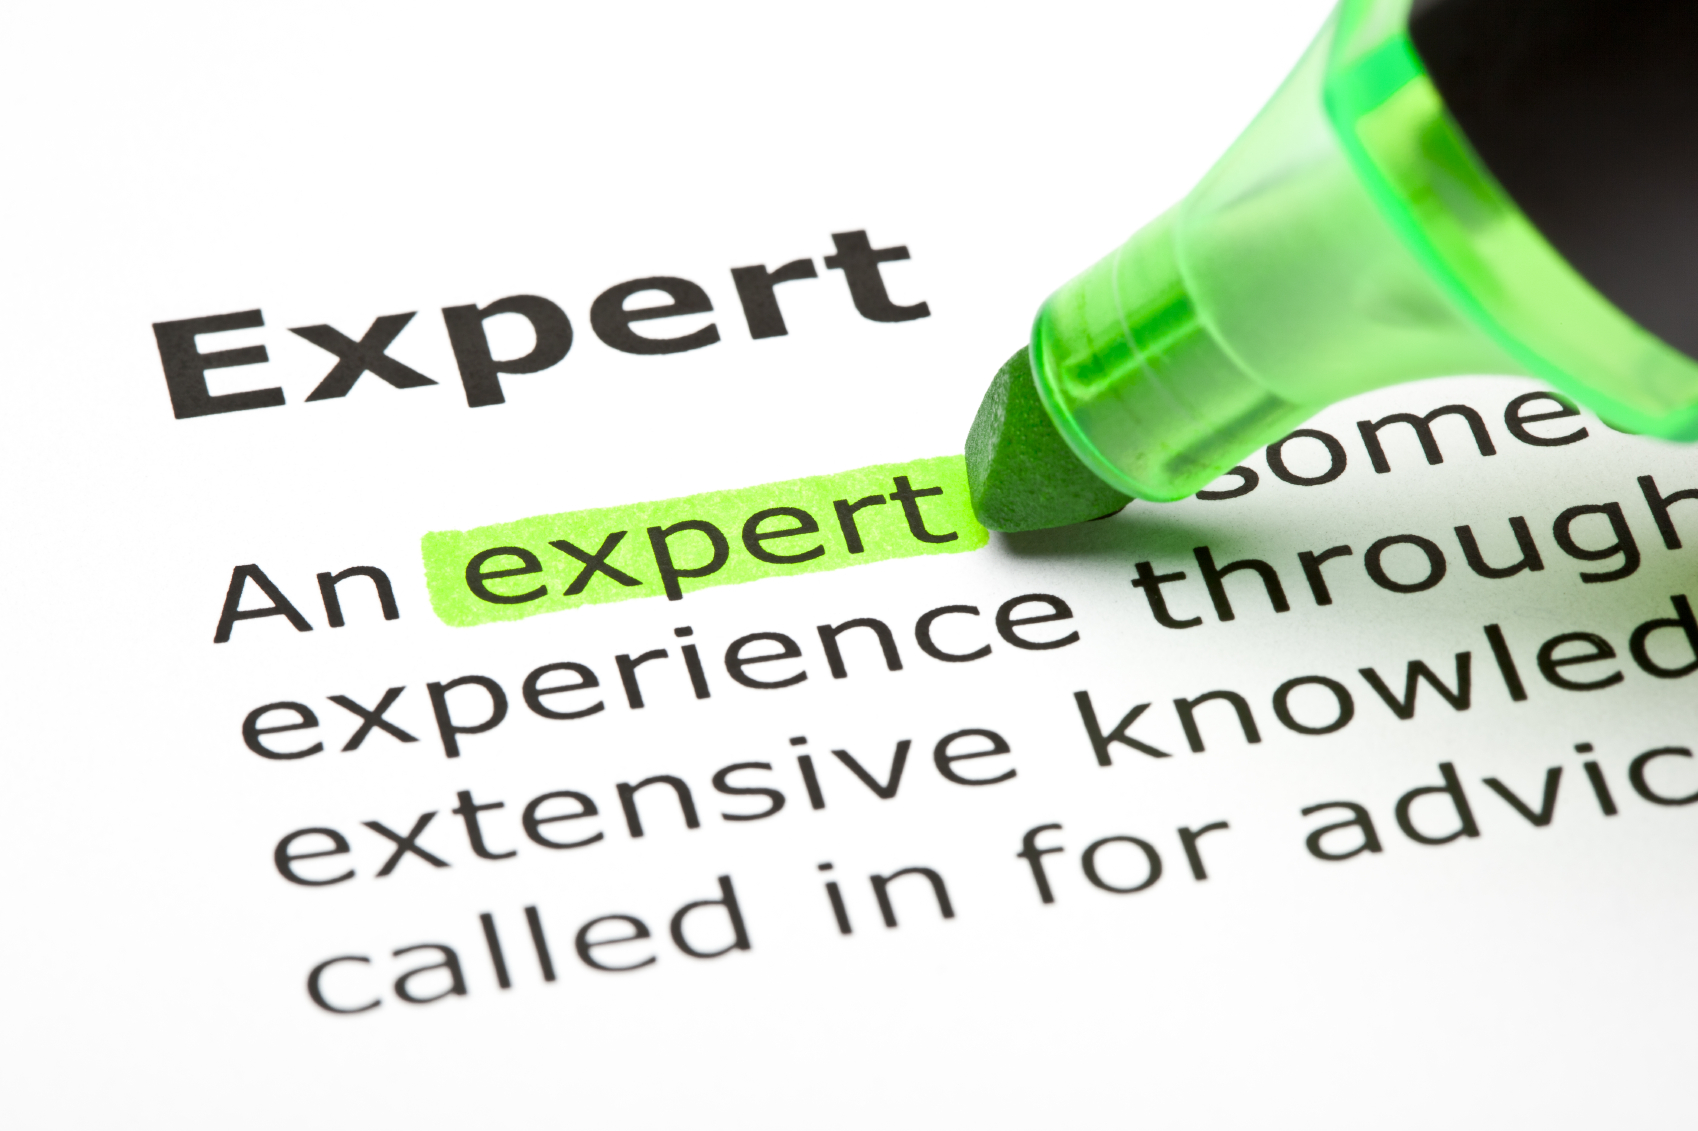 Expert definition: Office Experts, Microsoft Excel, Microsoft Office, Microsoft Access, Microsoft Word, Microsoft PowerPoint